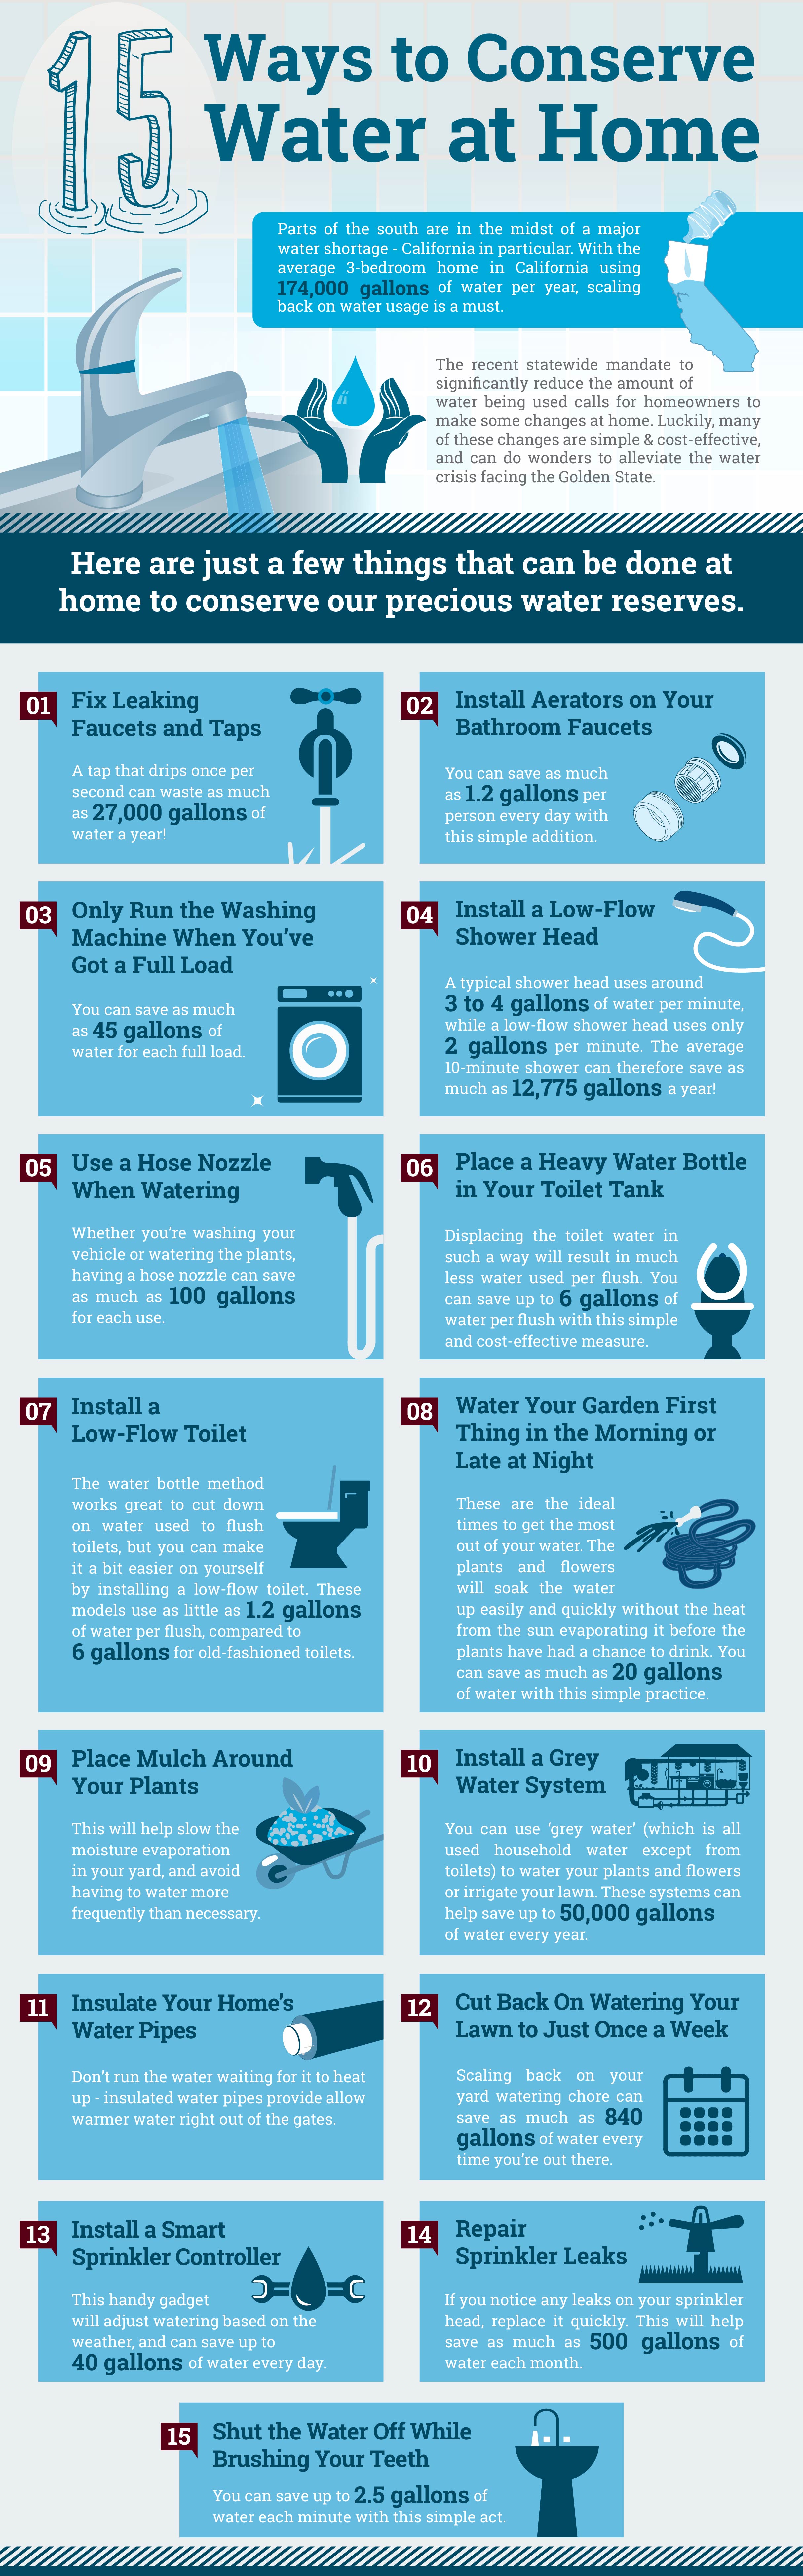 Infographic-15 Ways to Conserve Water at Home